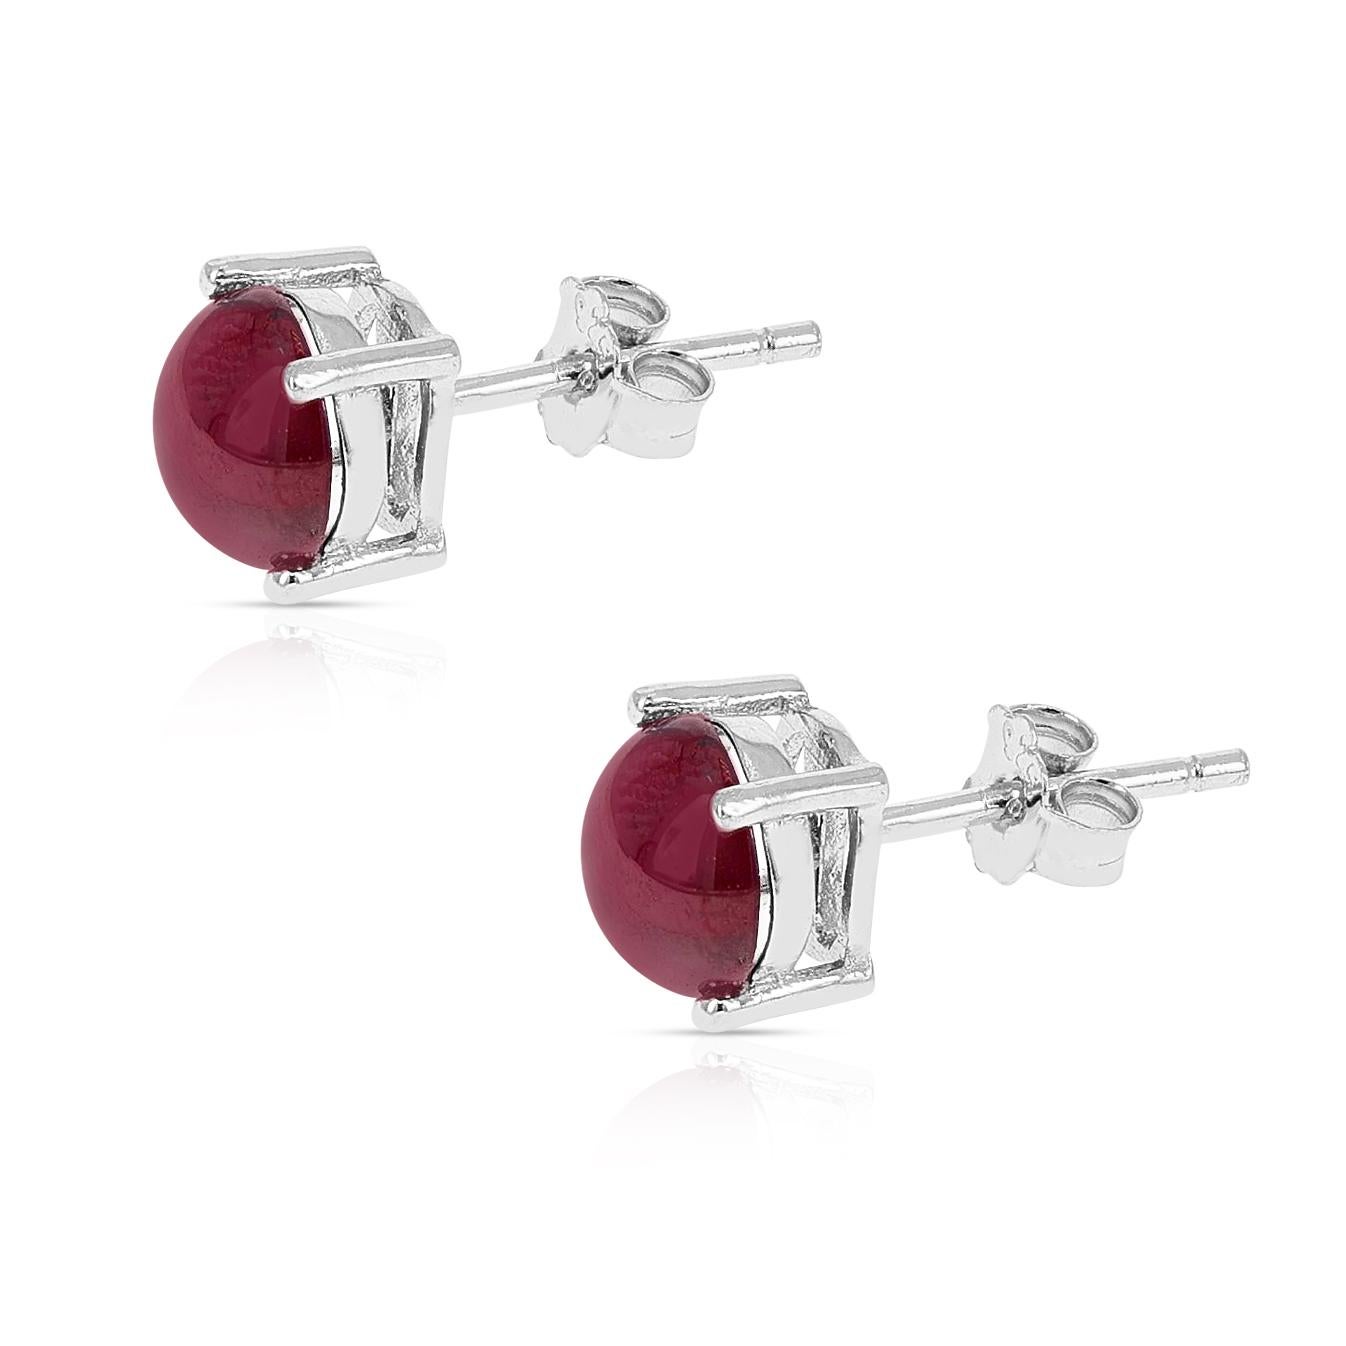 A pair of 7MM Genuine Tourmaline Round Cabochon Stud Earrings made in Sterling Silver. The total stone weight is approximately  3.10 carats.